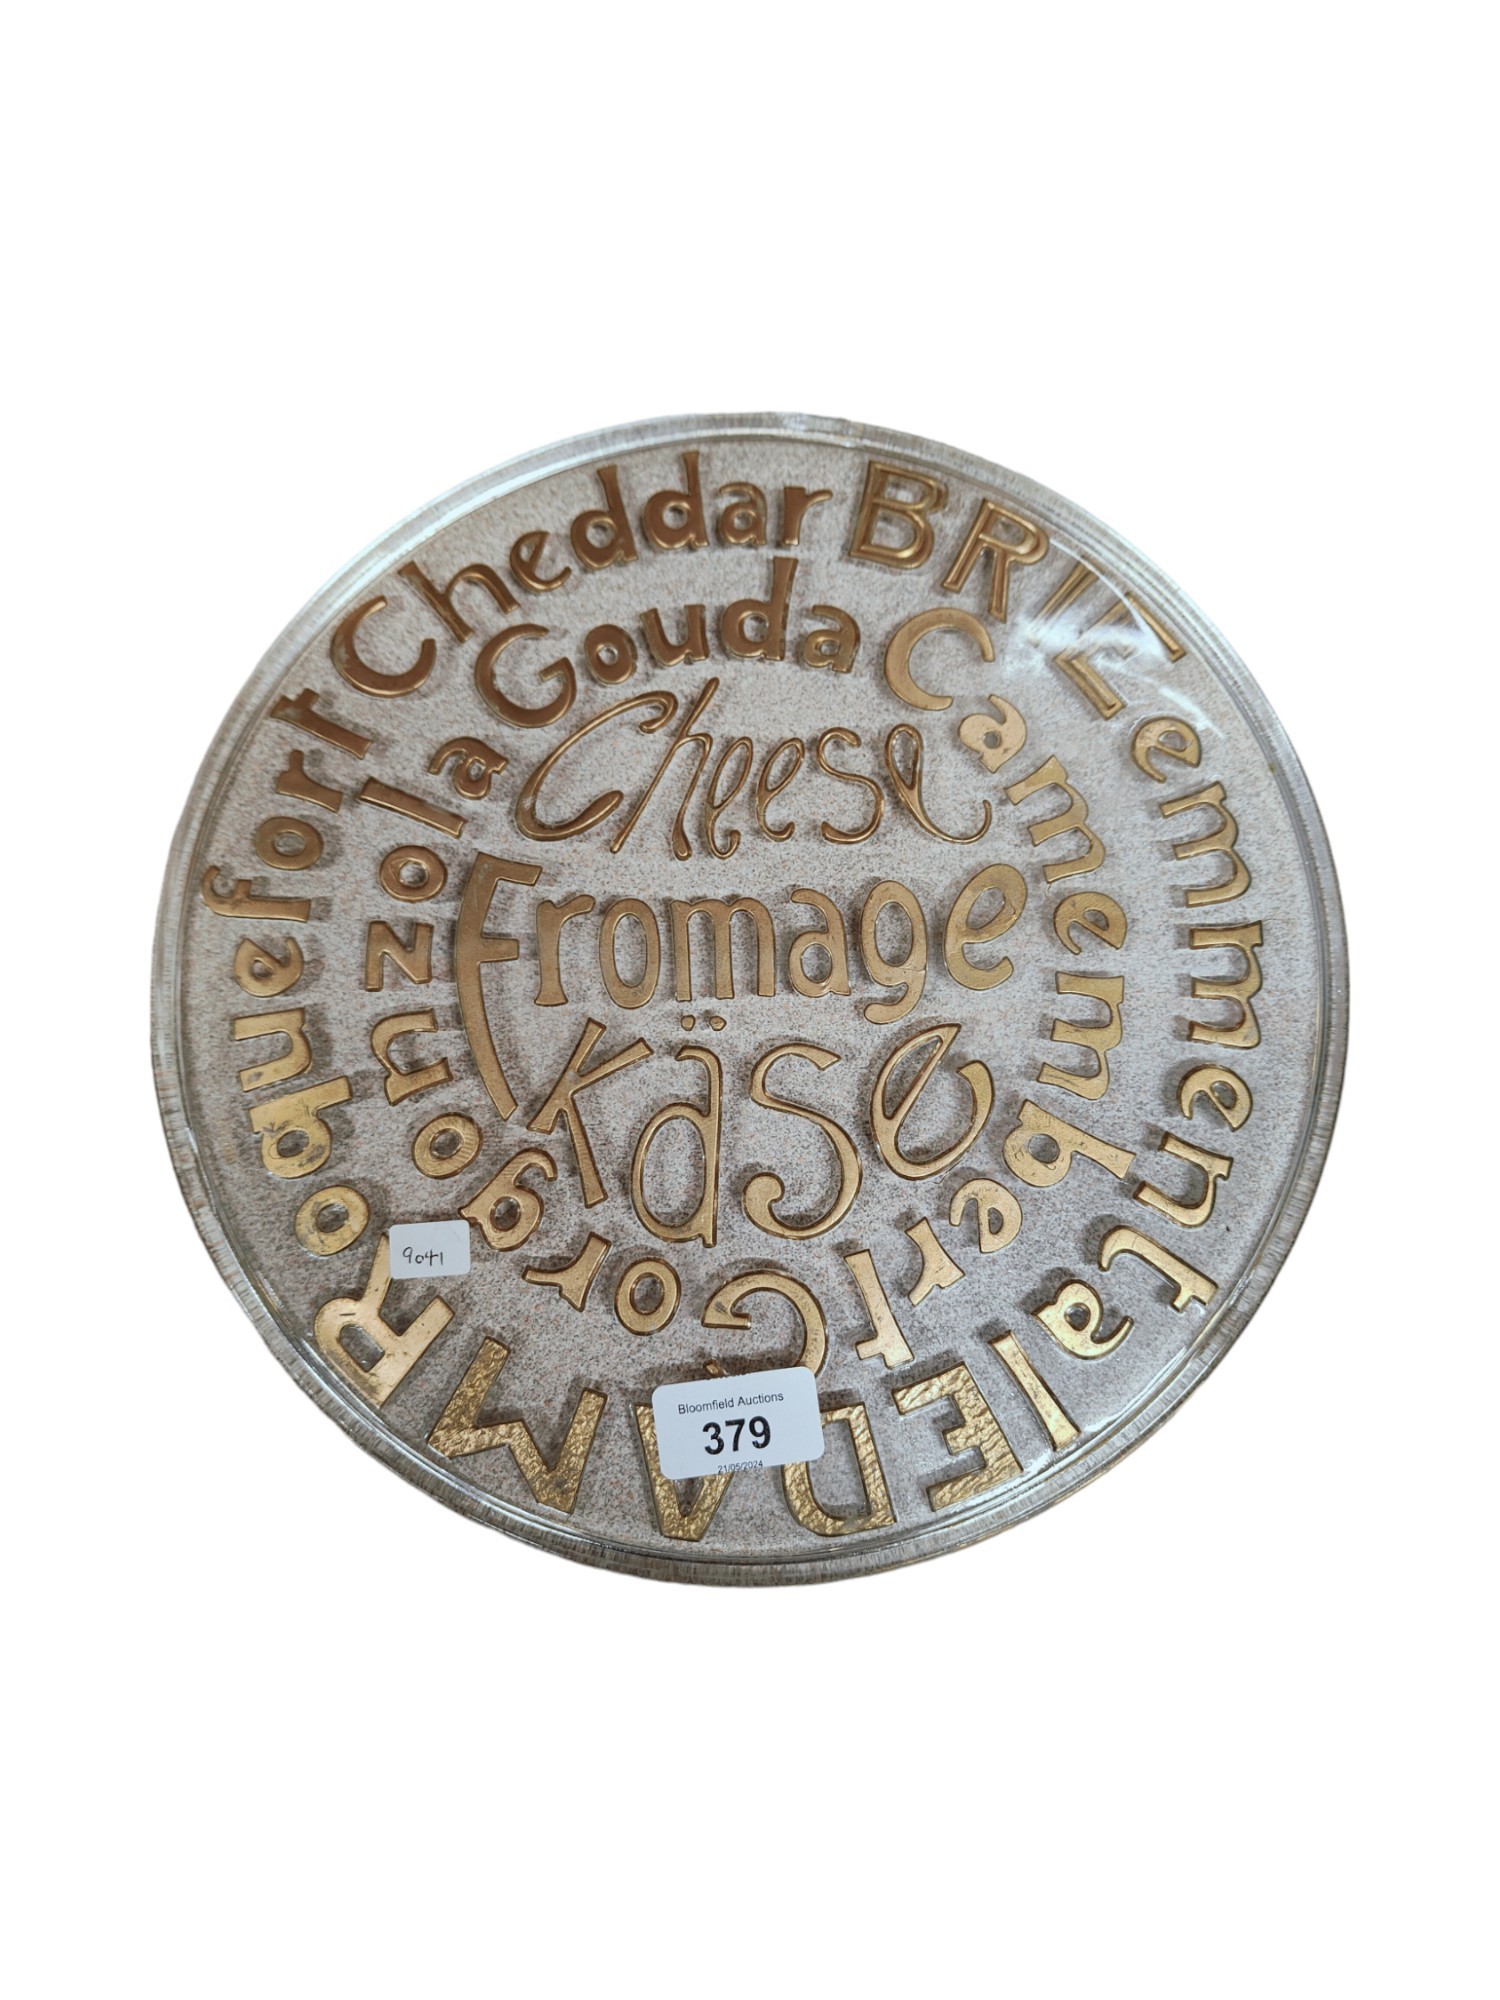 OLD GLASS ADVERTISING CHEESE BOARD